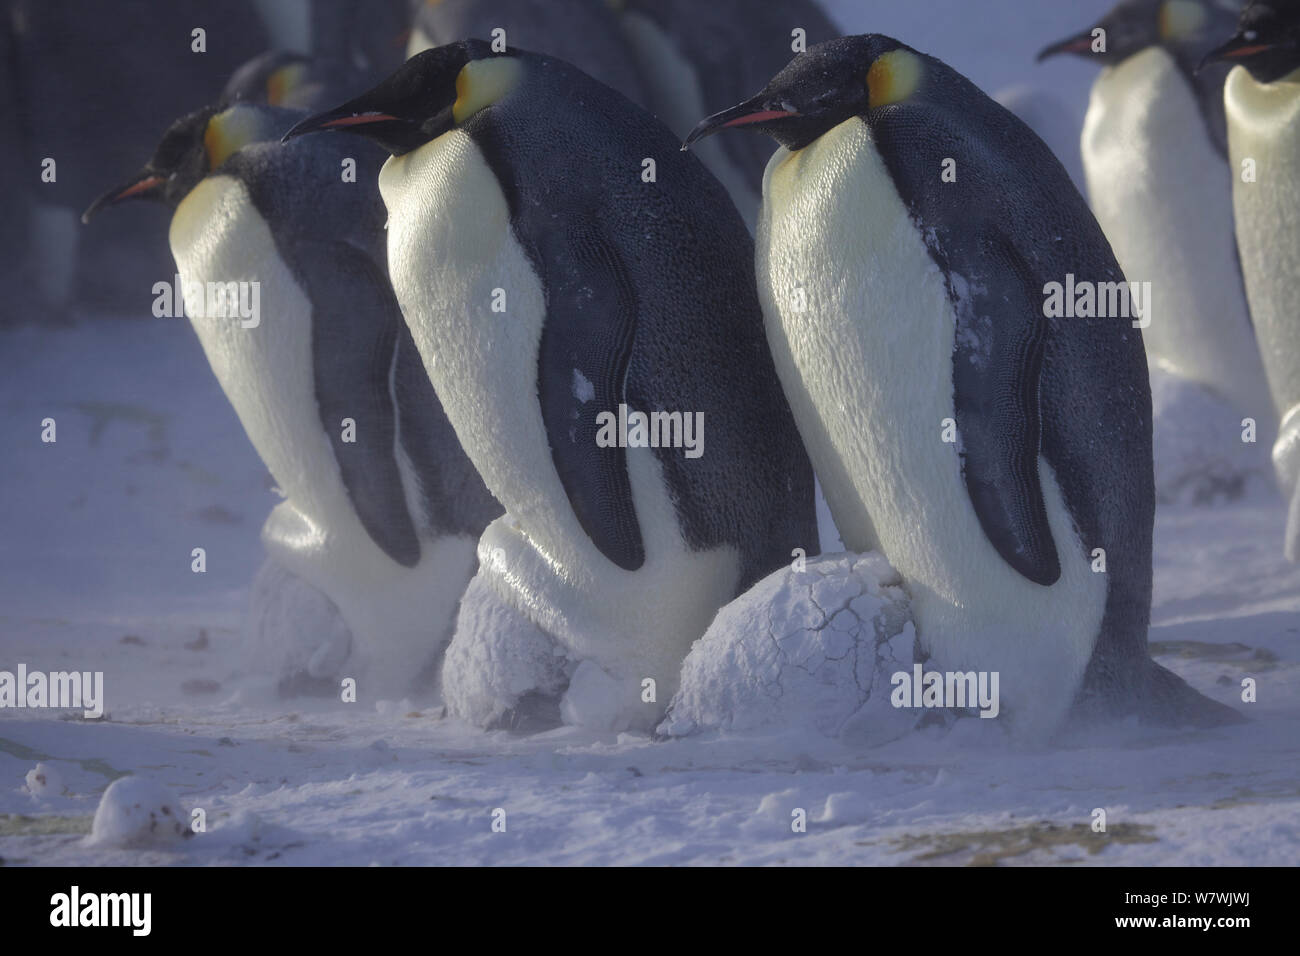 Emperor penguins (Aptenodytes forsteri) sleeping with chicks, covered in snow, sheltering in brood pouches, Antarctica, September. Stock Photo